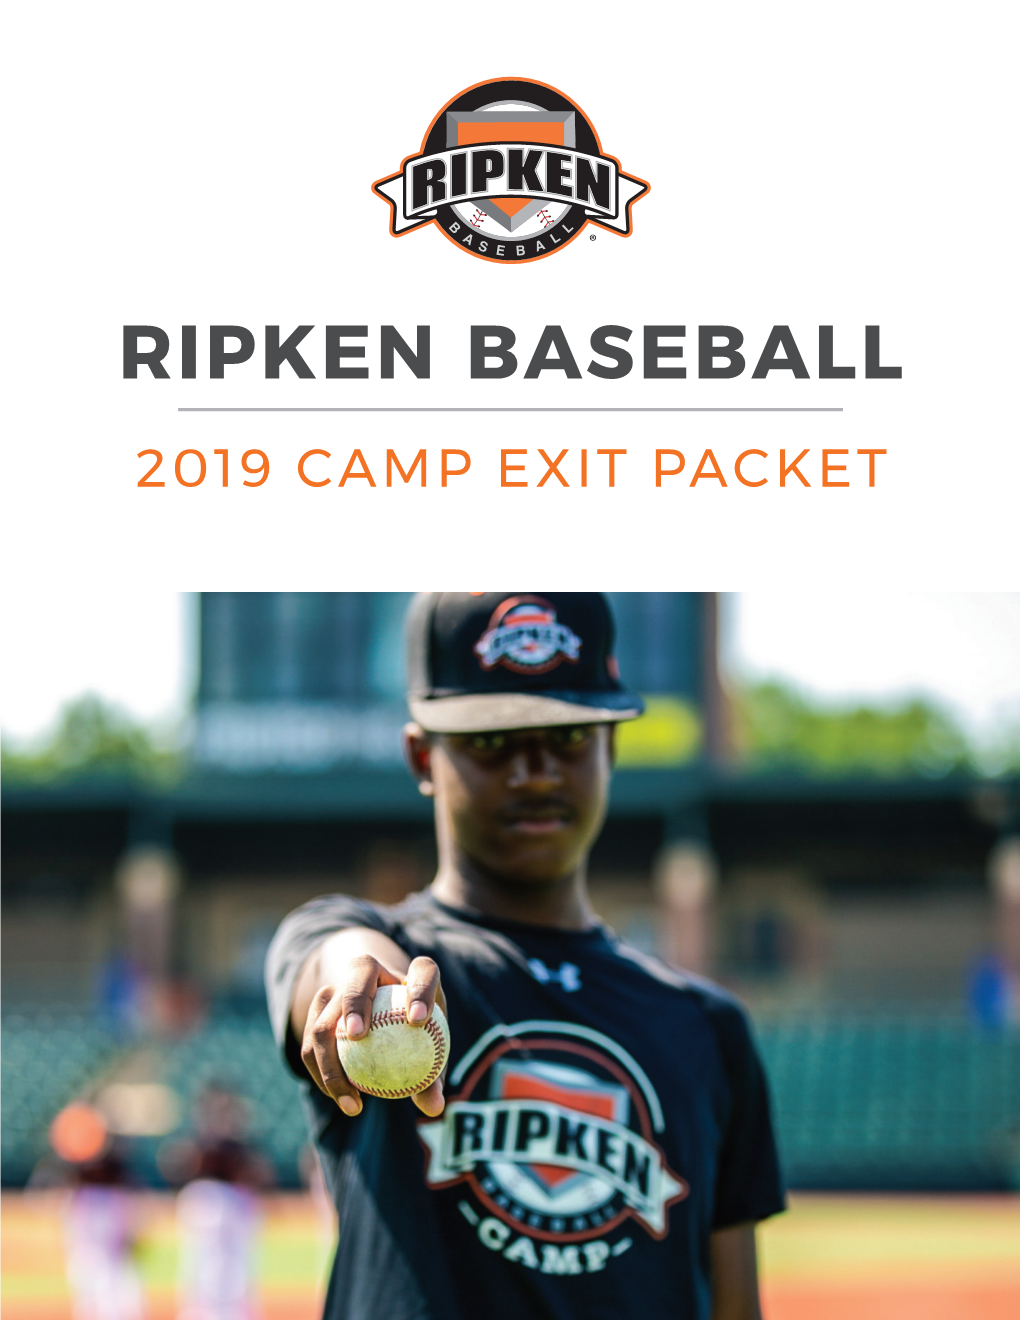 RIPKEN BASEBALL 2019 CAMP EXIT PACKET “THE RIPKEN WAY” KEEP IT SIMPLE • Reduce Technical Aspects to Teaching the Game to Its Most Simple Parts